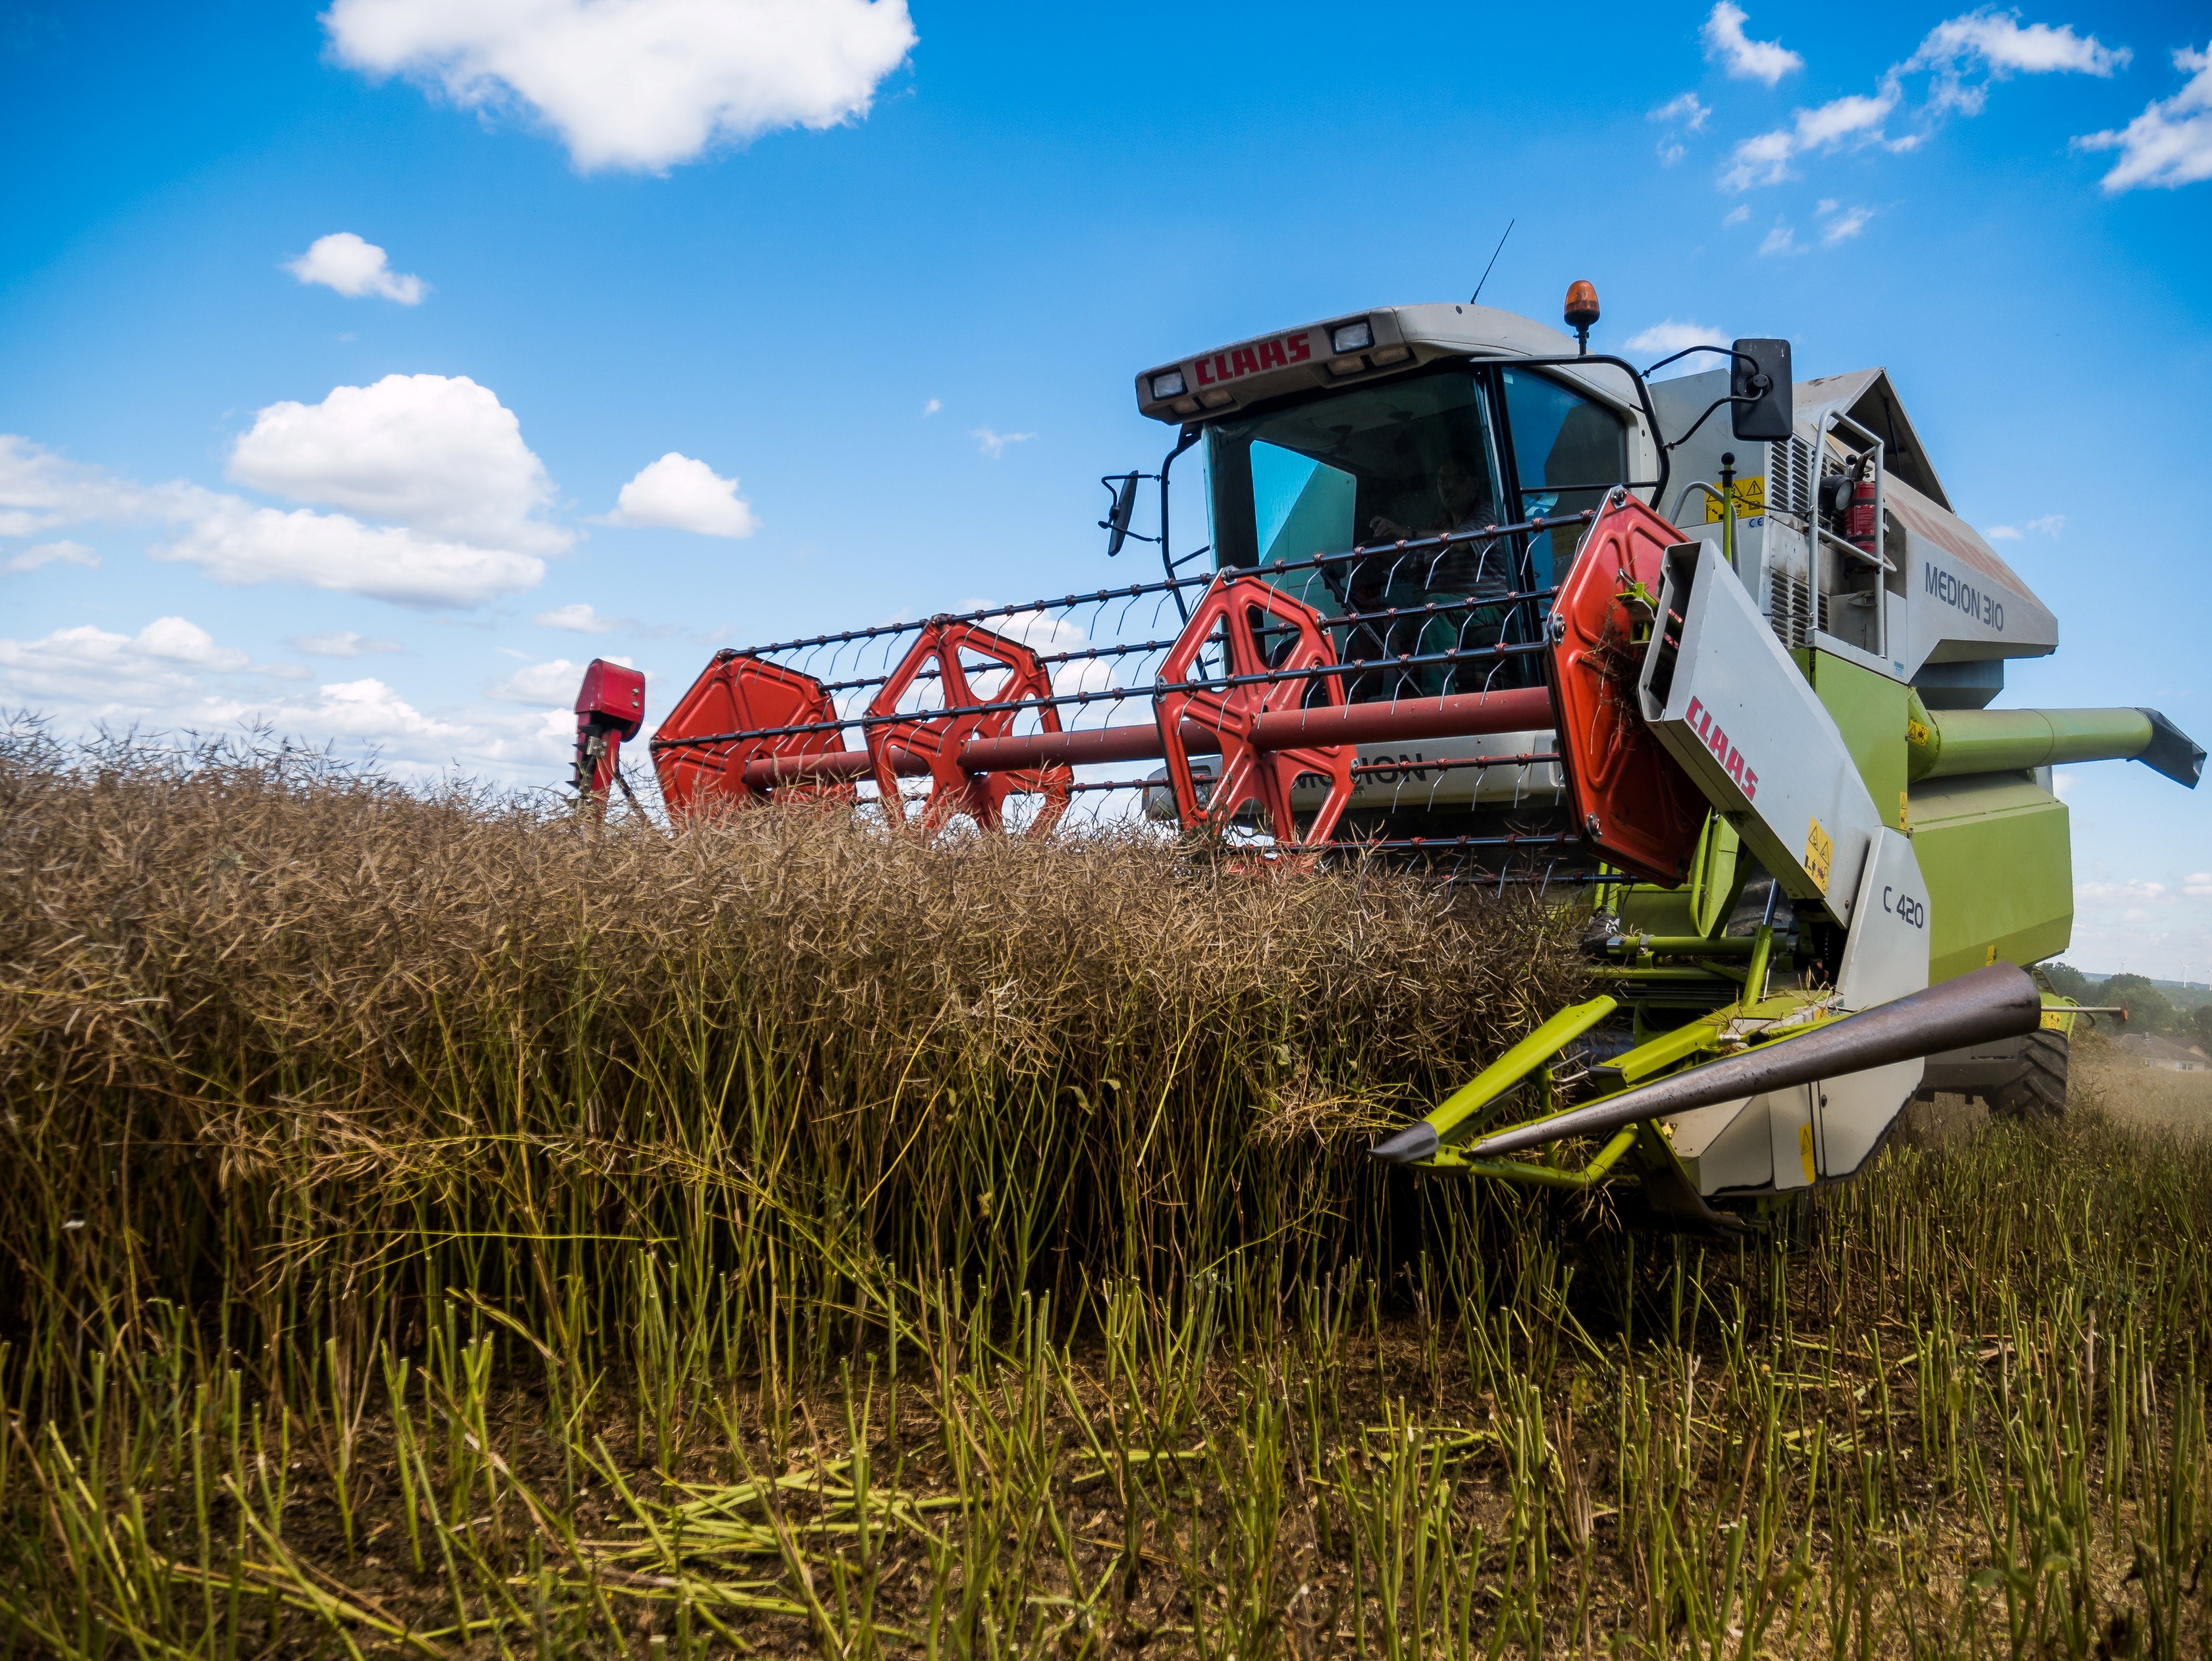 Colour photo of a combine harvester being used in the field